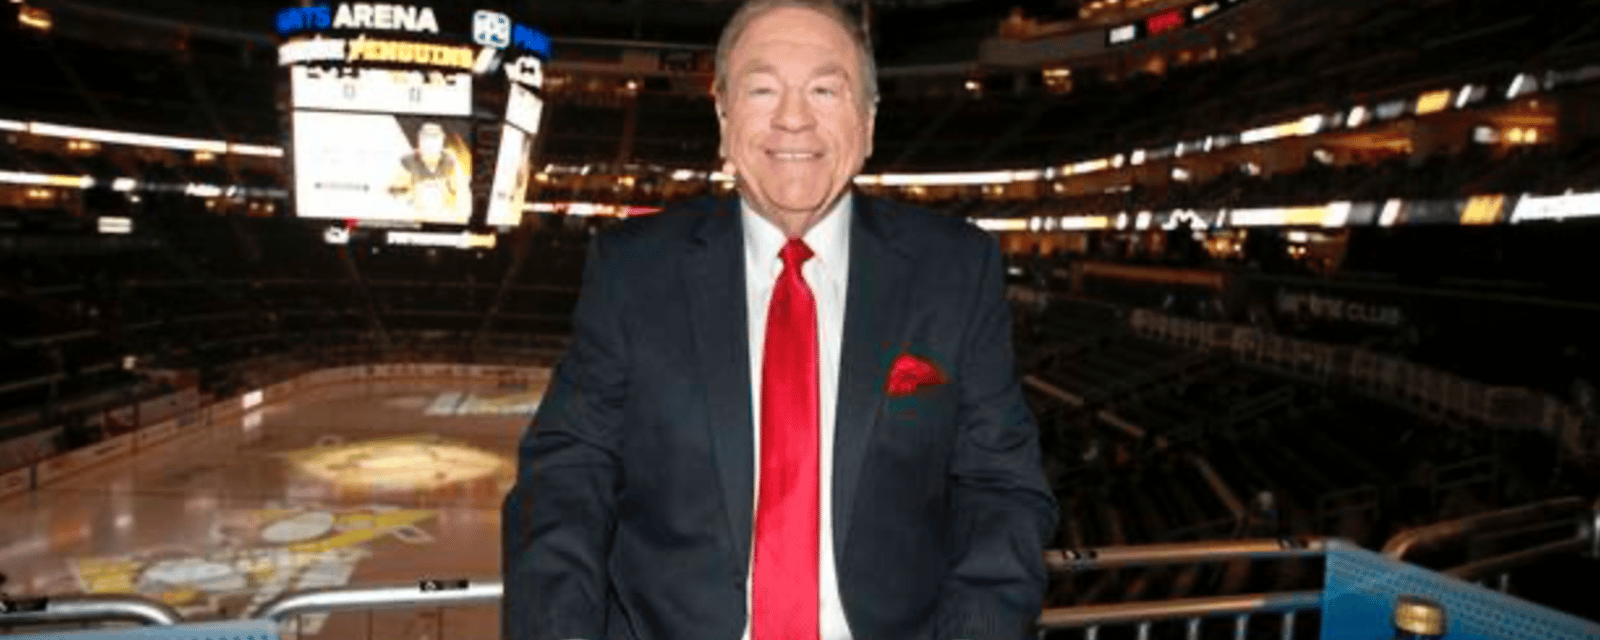 Lengendary Pittsburgh broadcaster has died 